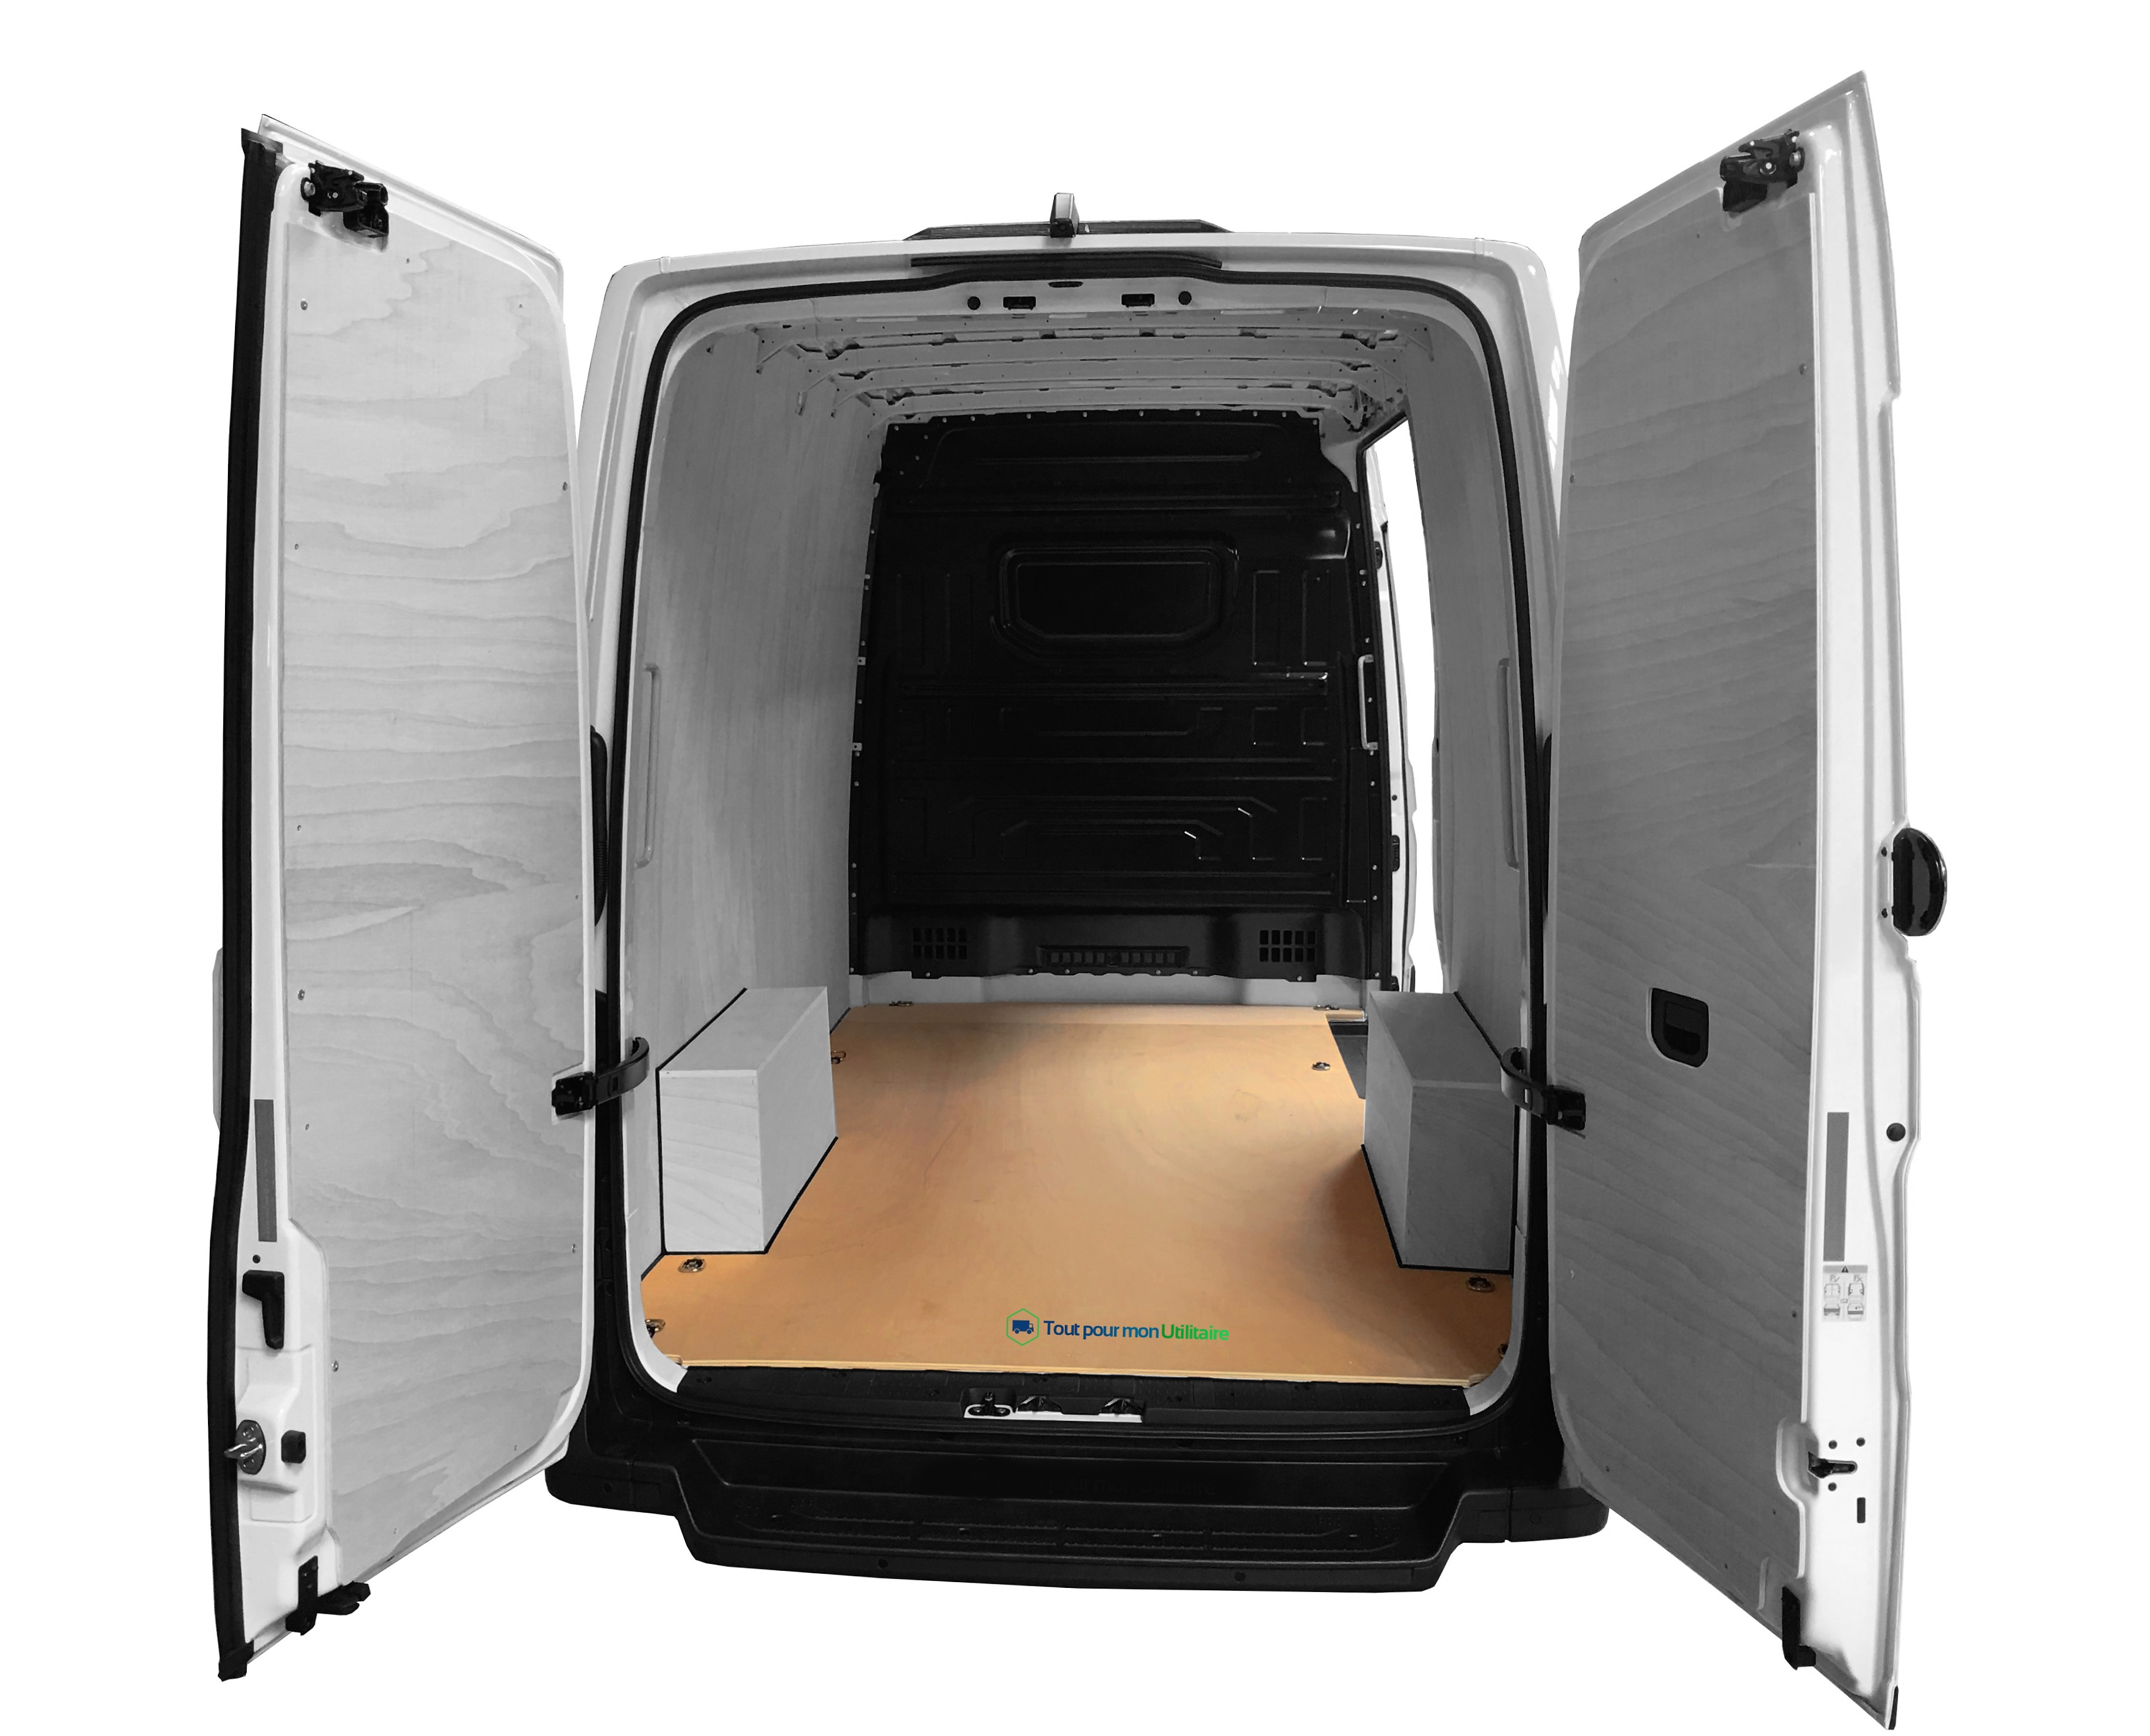 VOLET DE PROTECTION 10 COUCHES ISOPLAIR POUR VW CRAFTER II APRES 2016 / VW  CRAFTER CALIFORNIA